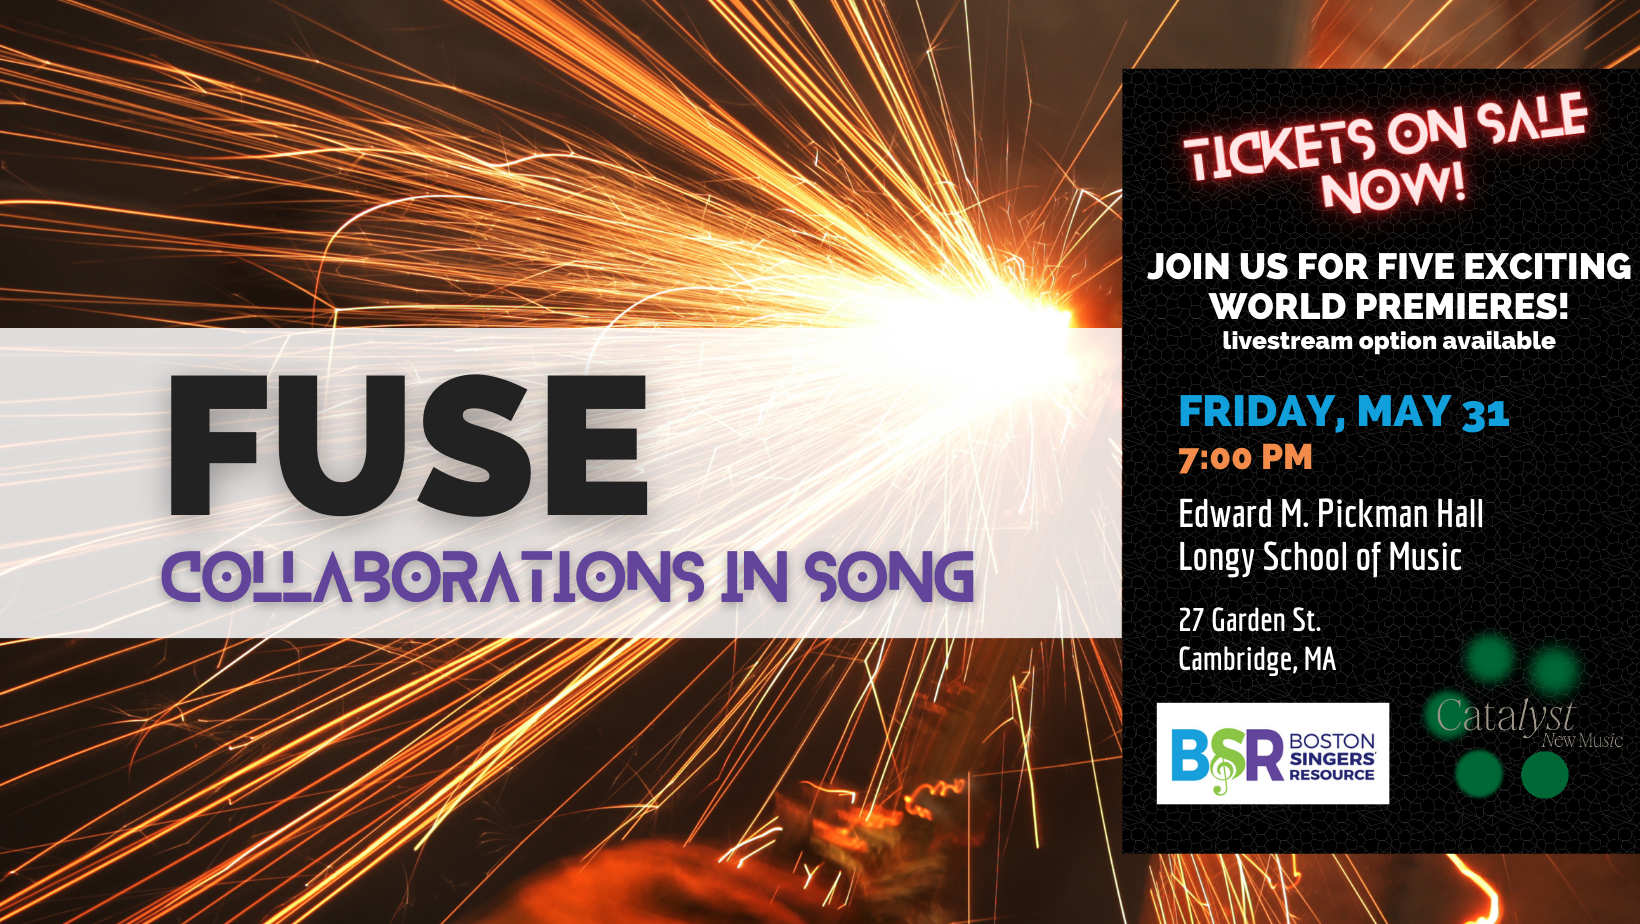 Tickets now on sale for FUSE!